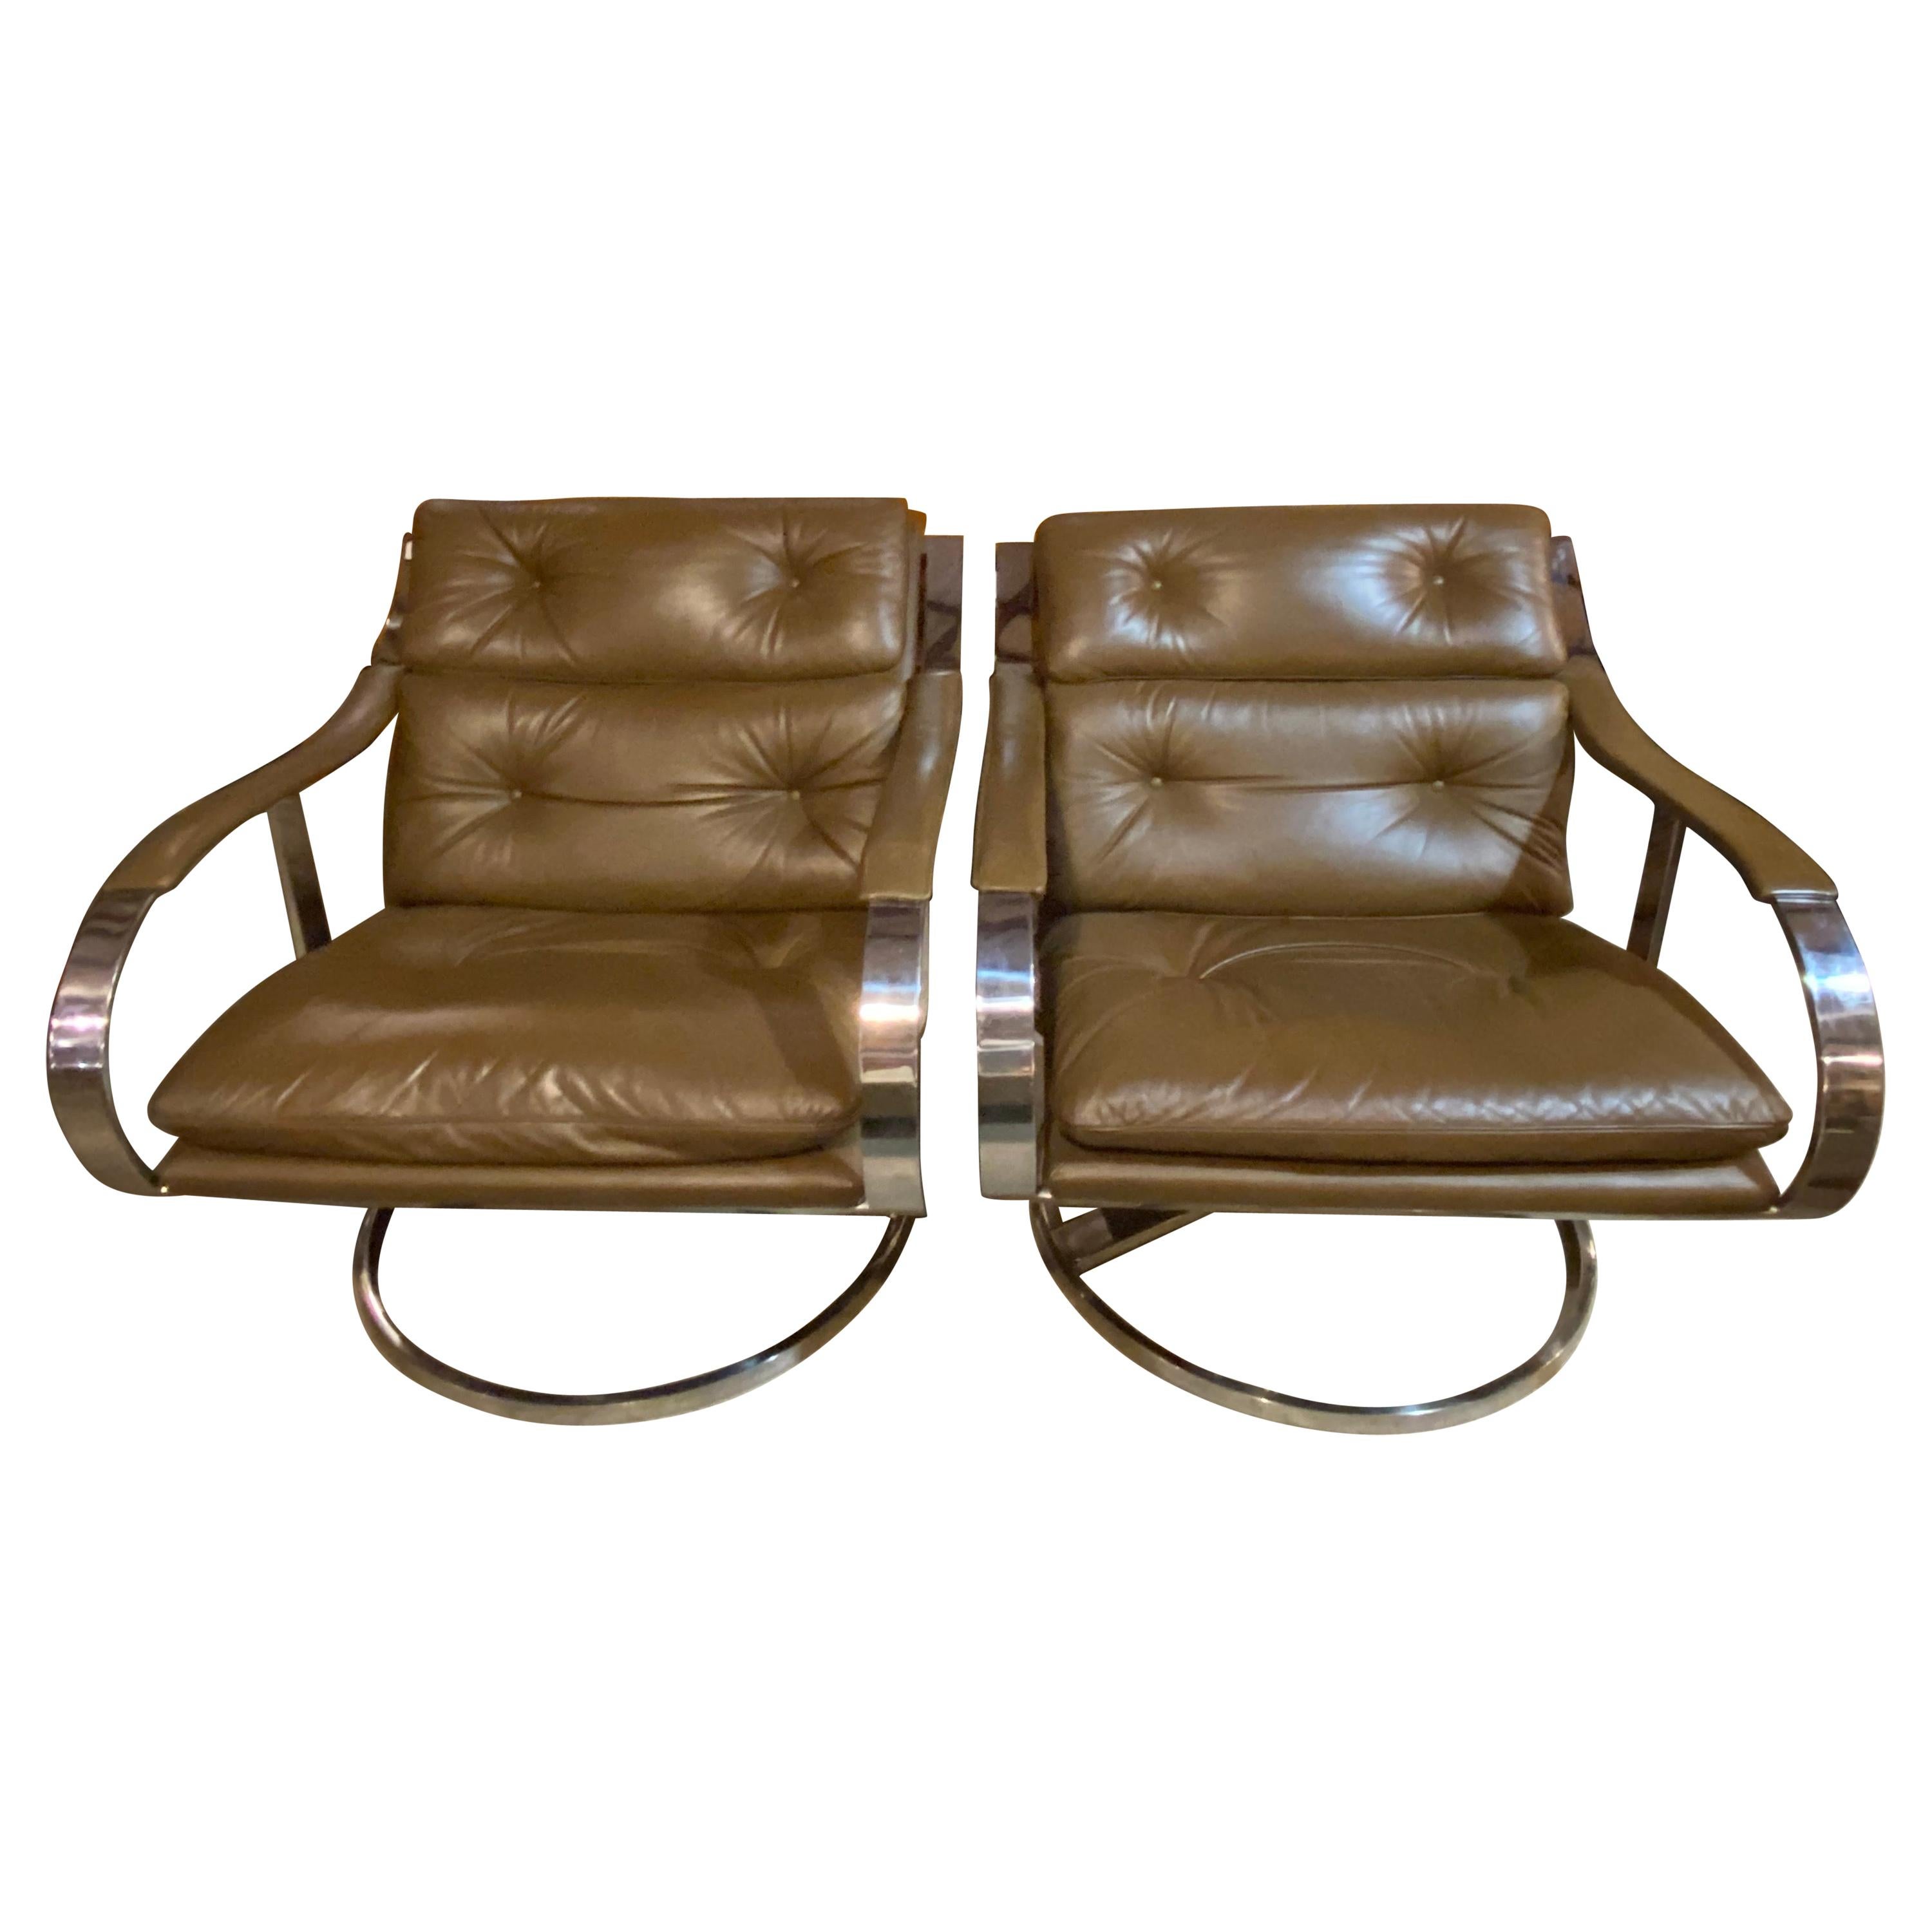 Pair of Mid-Century Lounge Chairs by Gardner Leaver for Steelcase